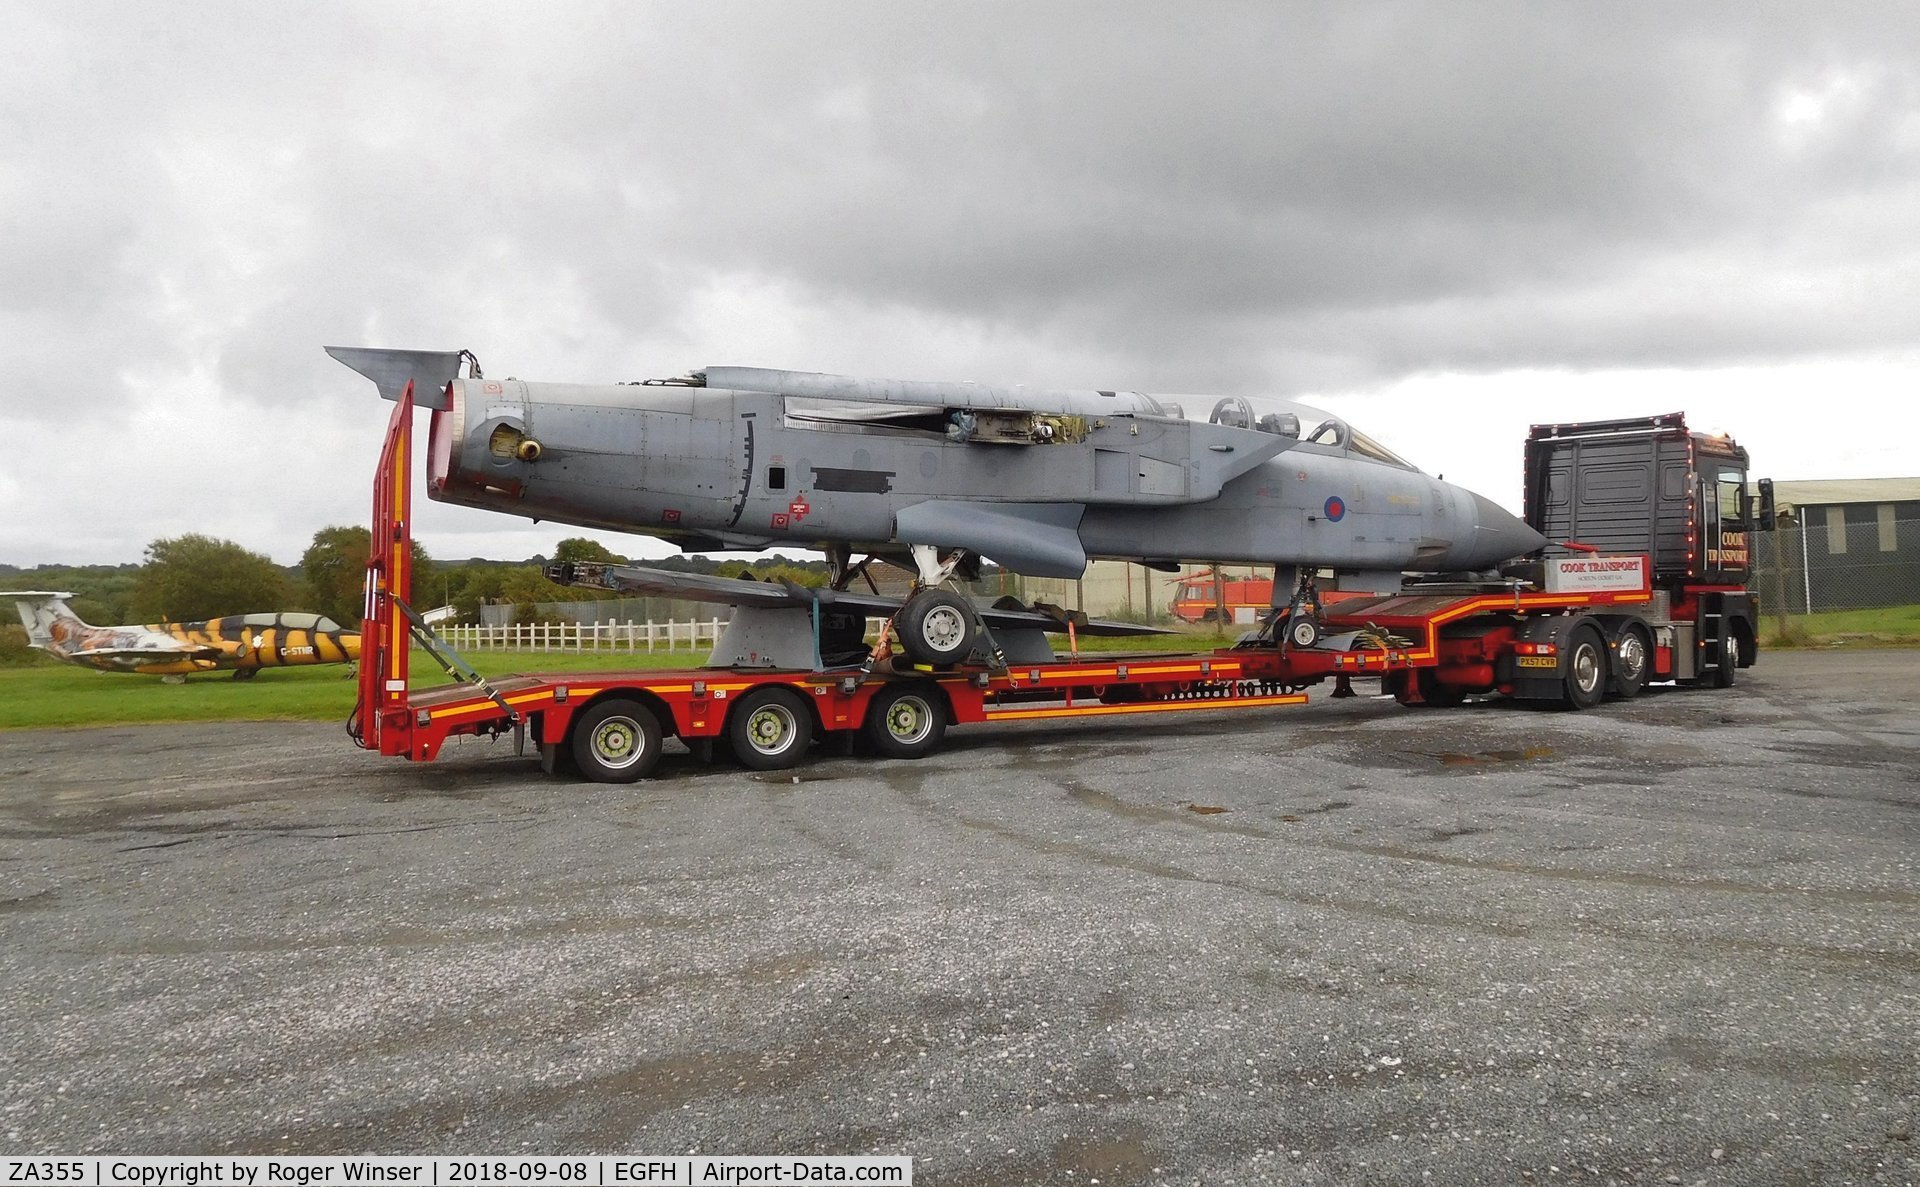 ZA355, 1980 Panavia Tornado GR.1 C/N 032/BS008/3016, The ex-RAF Tornado aircraft ZA355/9310M being removed from the airport and taken to White Waltham for refurbishment before going to Duxford.